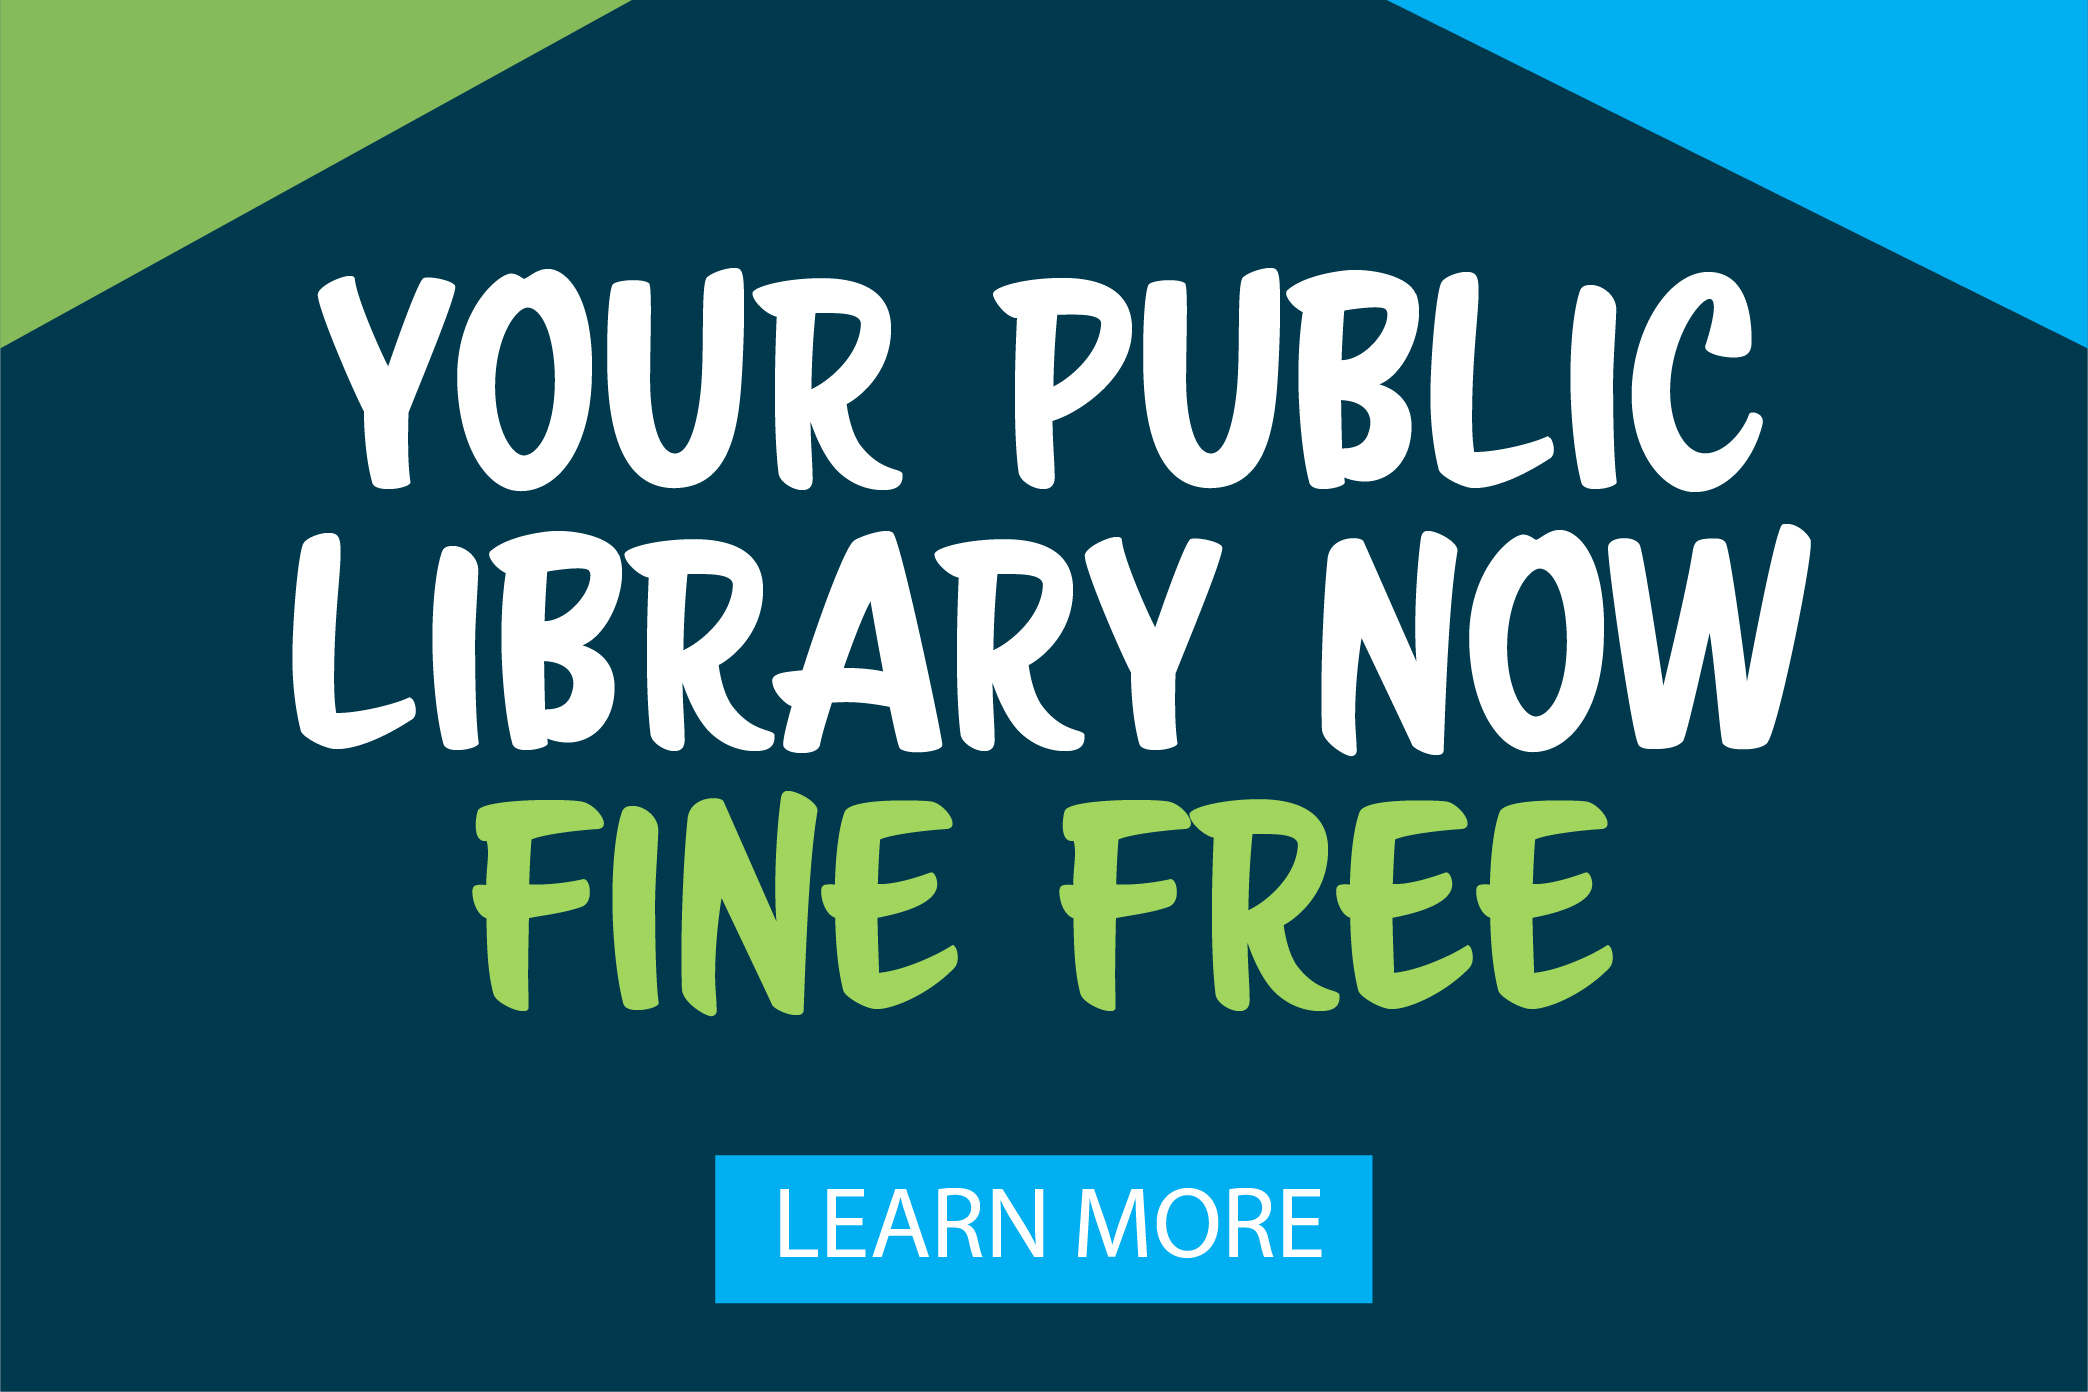 Your public library now fine free